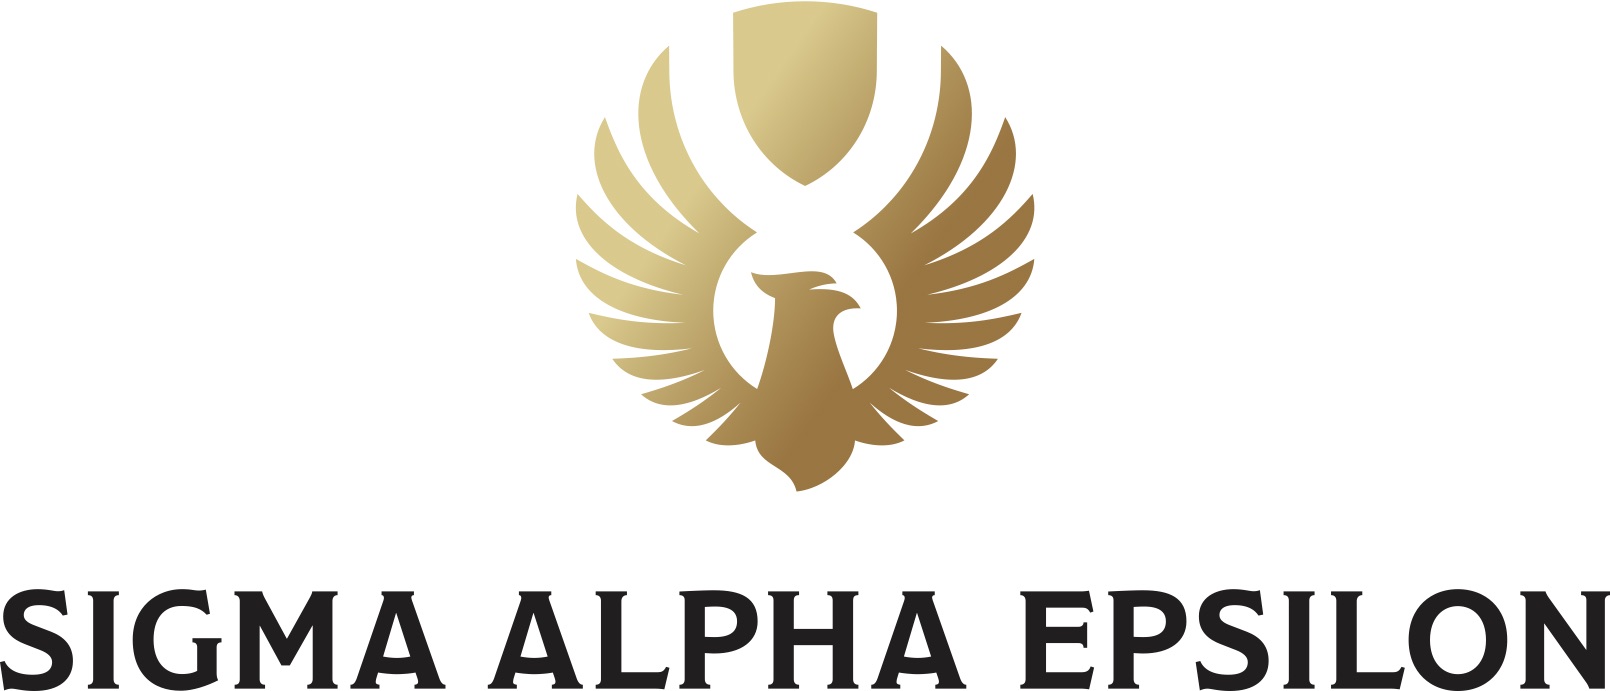 Gold phoenix with wings spread on top of the words Sigma Alpha Epsilon